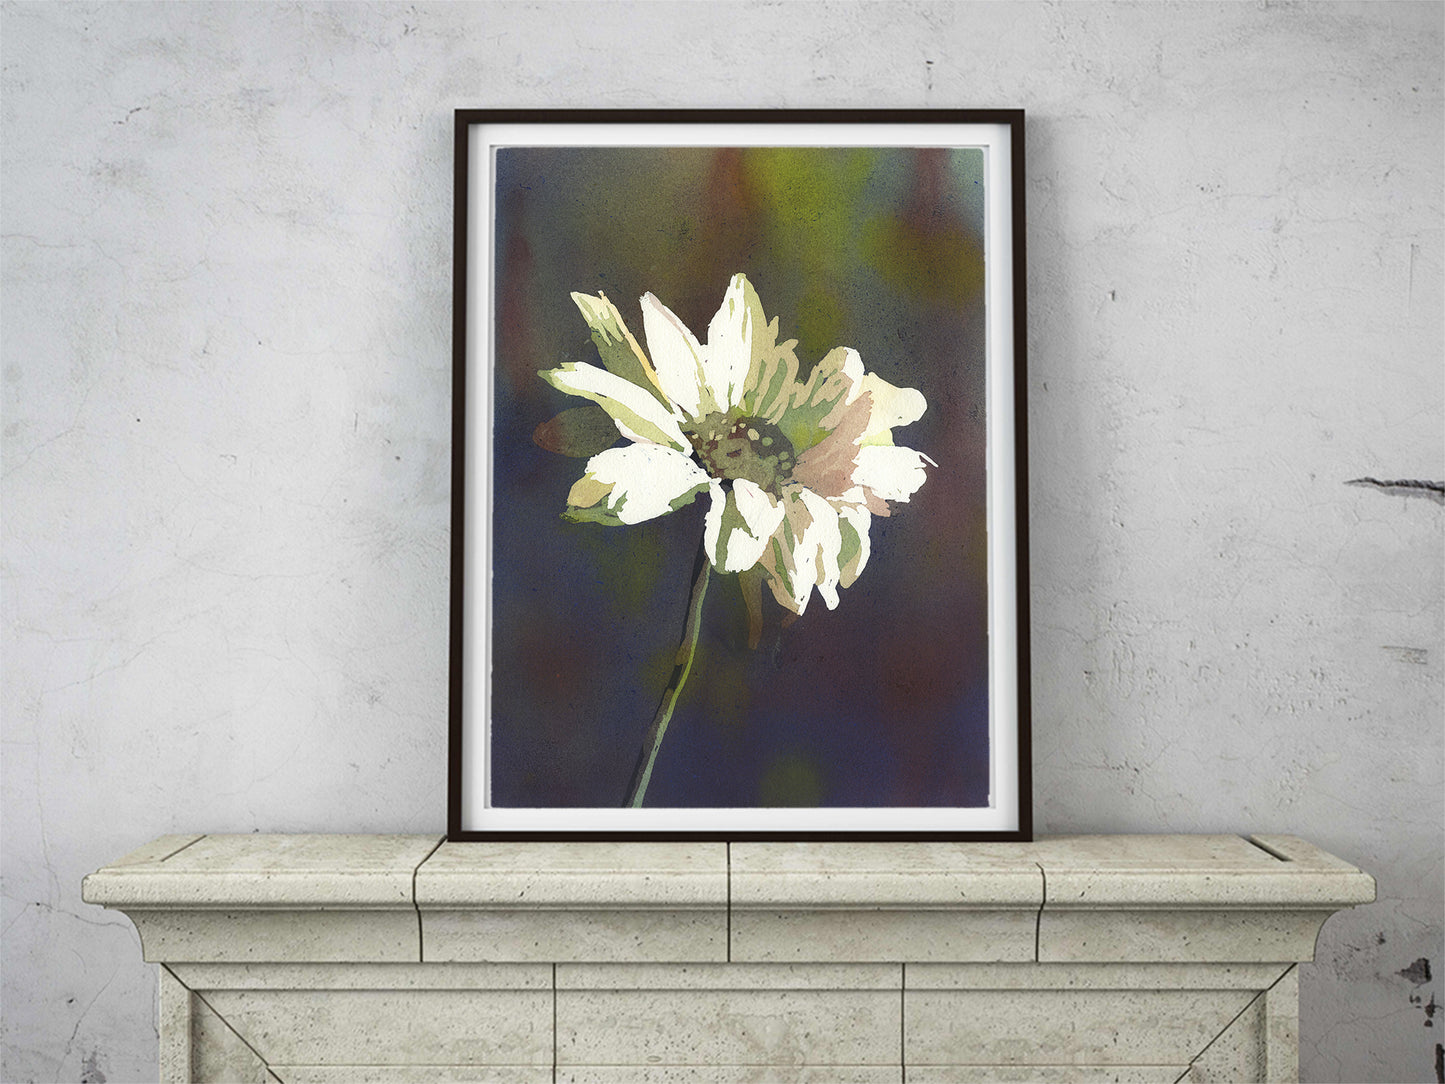 Watercolor painting daisy flower green floral artwork fine art print. Colorful home decor daisy, fine art painting wall art giclee (print)